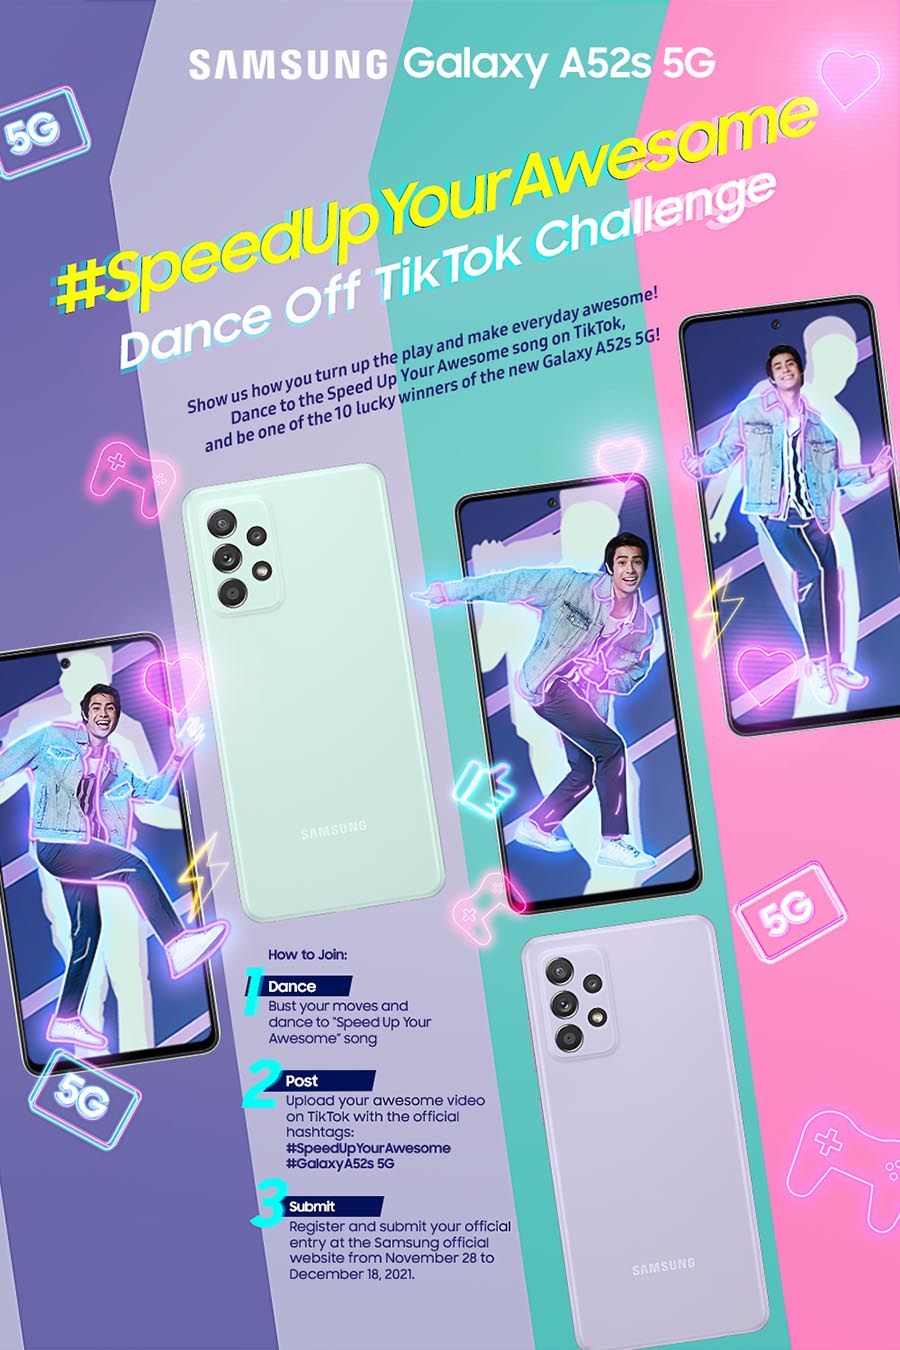 Show off your awesome moves with Donny Pangilinan at SAMSUNG’s #SpeedUpYourAwesome TikTok challenge